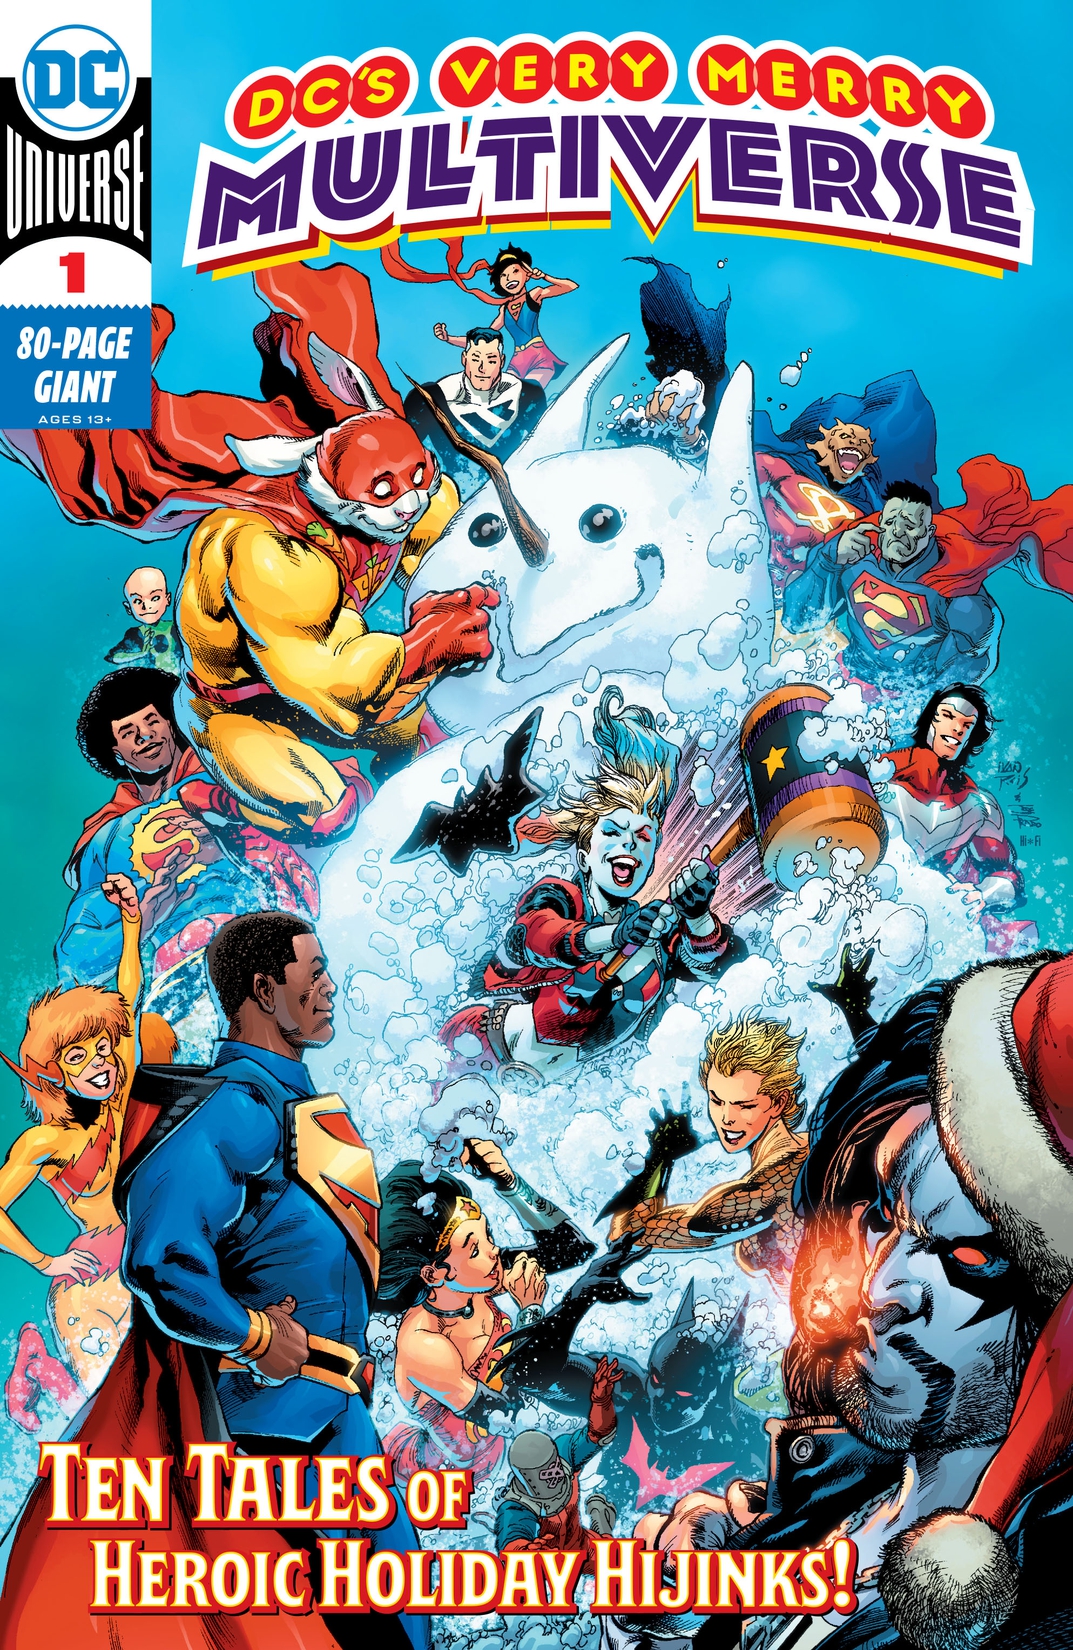 DC's Very Merry Multiverse #1 preview images